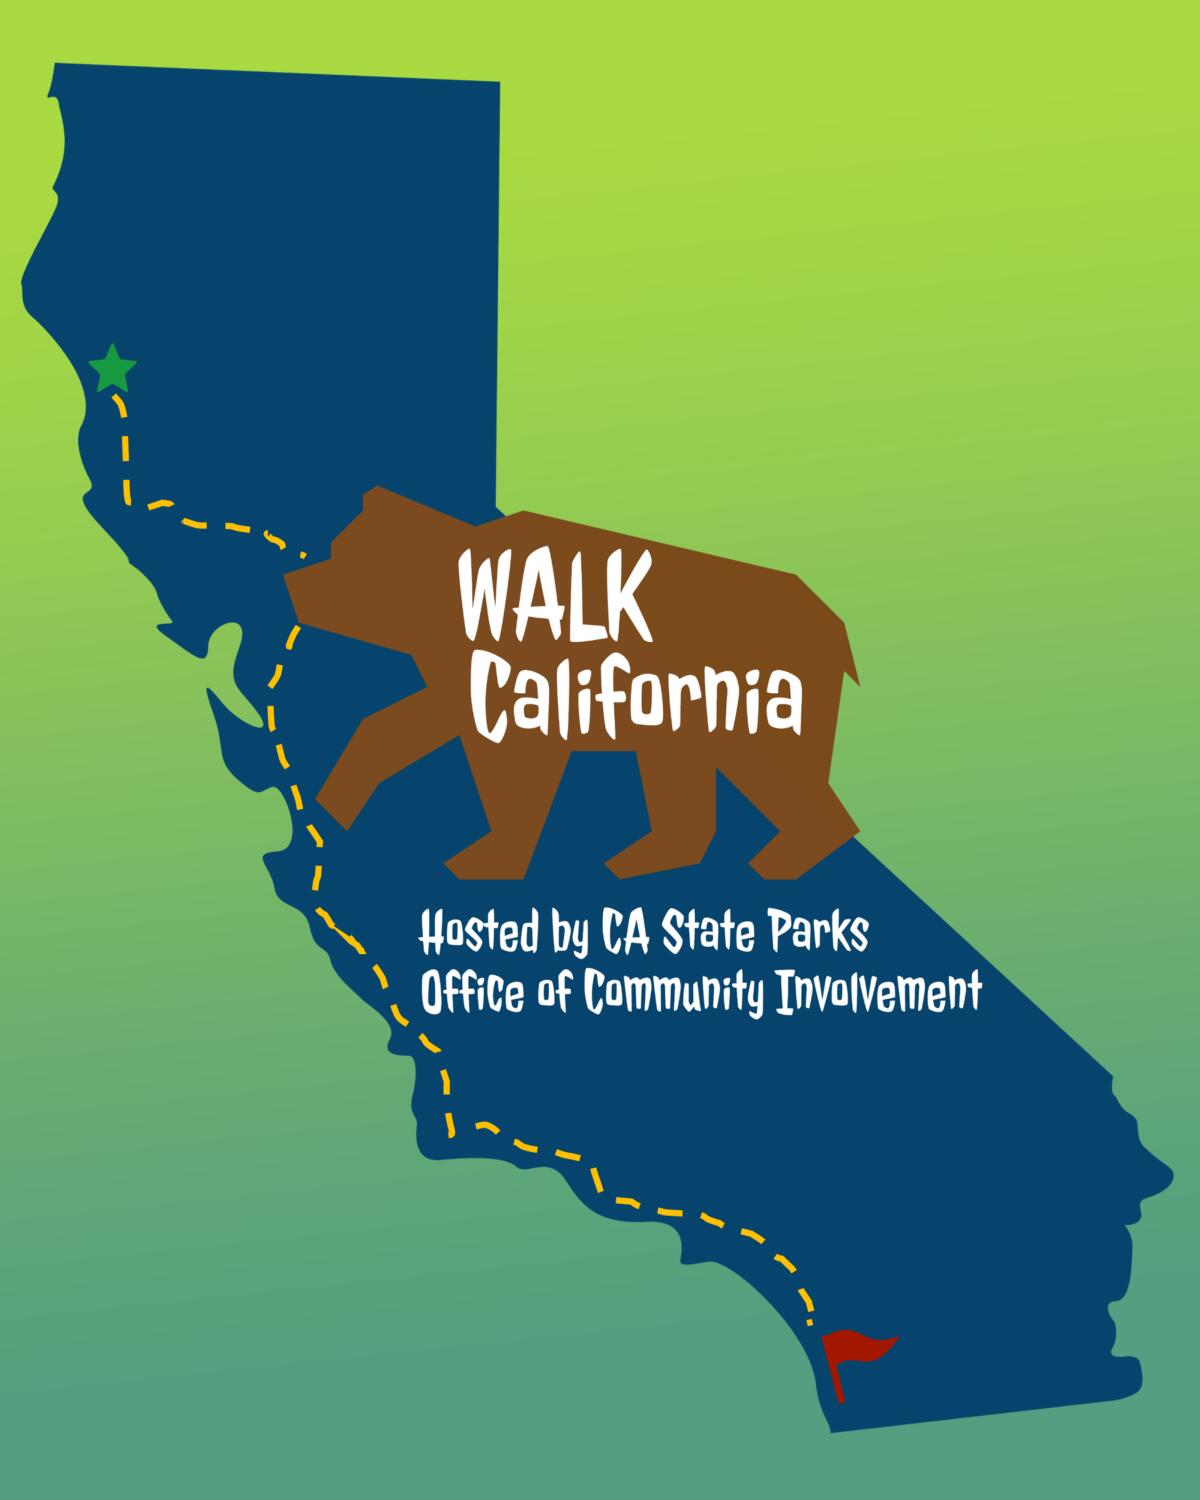 The Walk California logo is a bear walking on the state's outline.